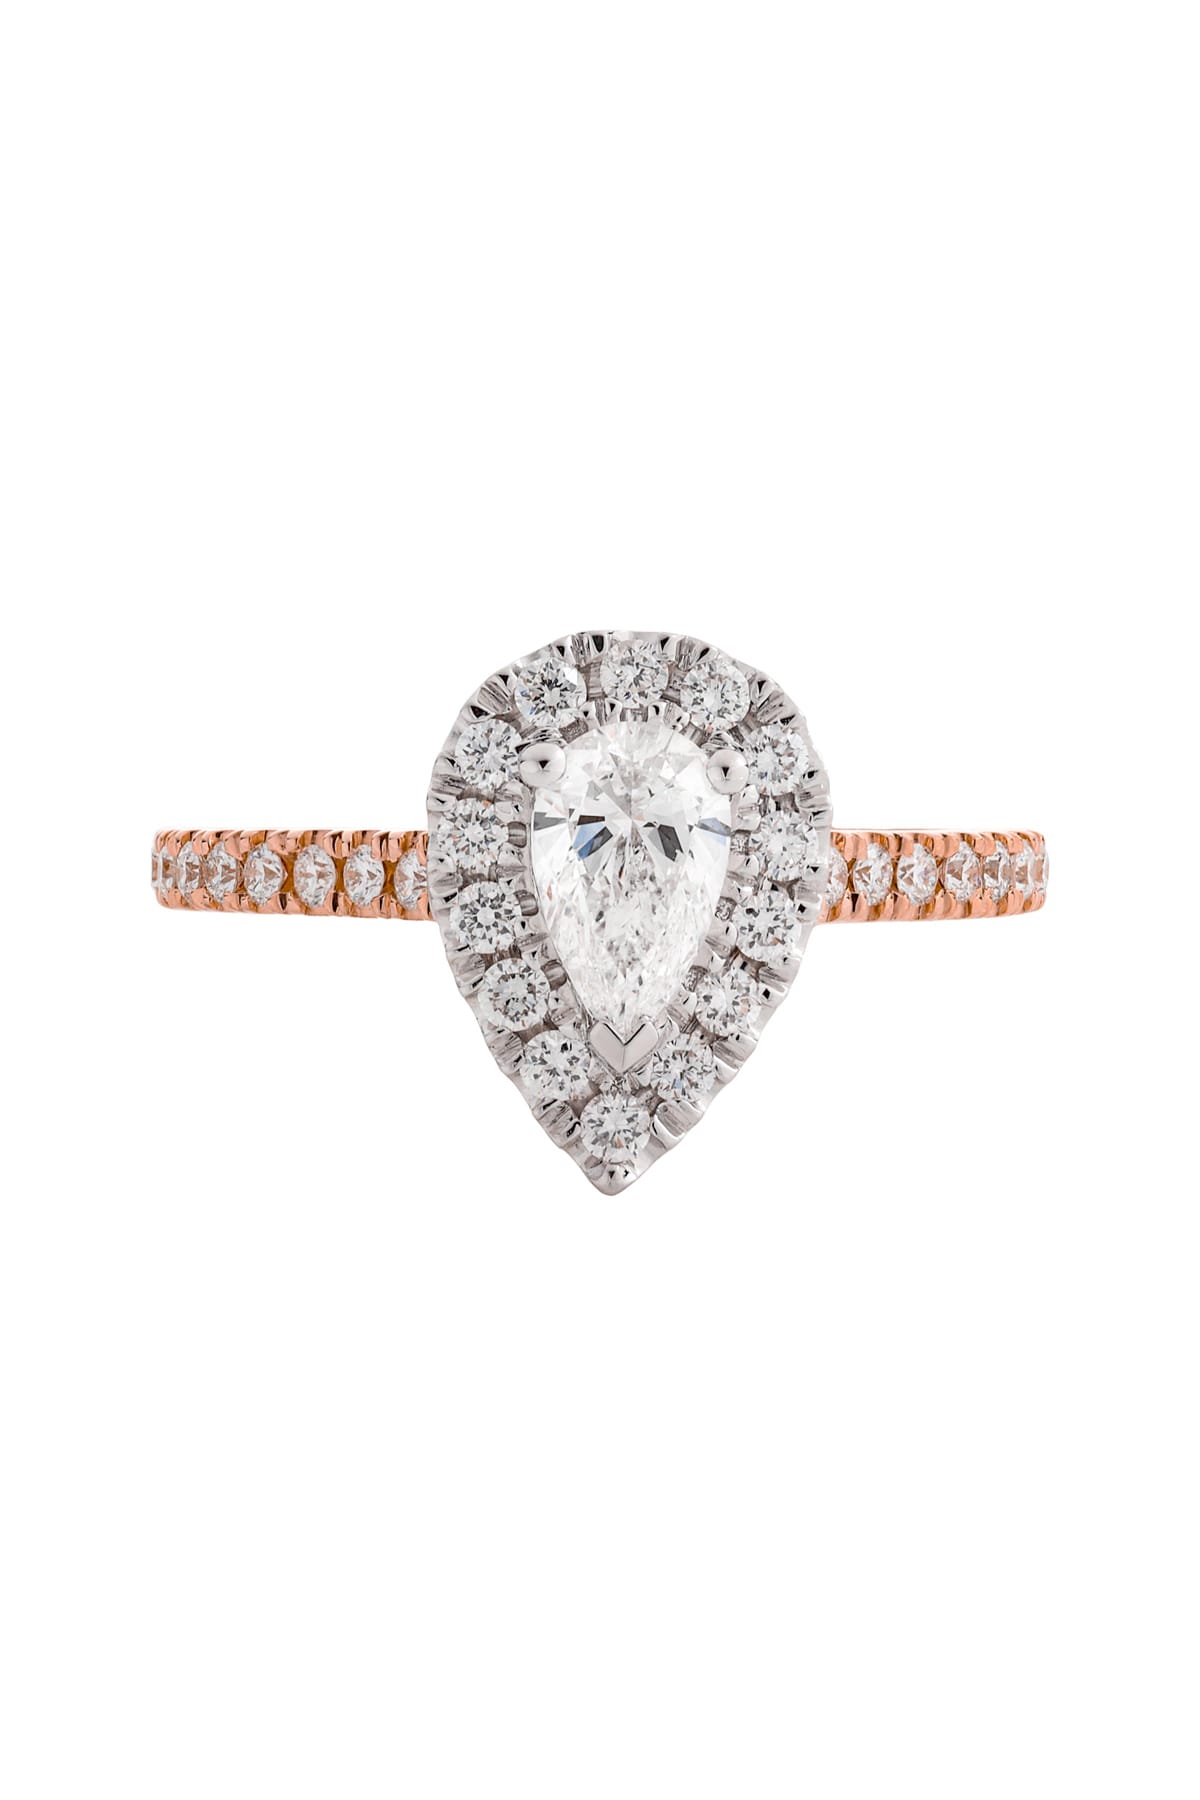 50 carat diamonds in 18K white gold Cathedral setting, absolutely in love…  : r/EngagementRings